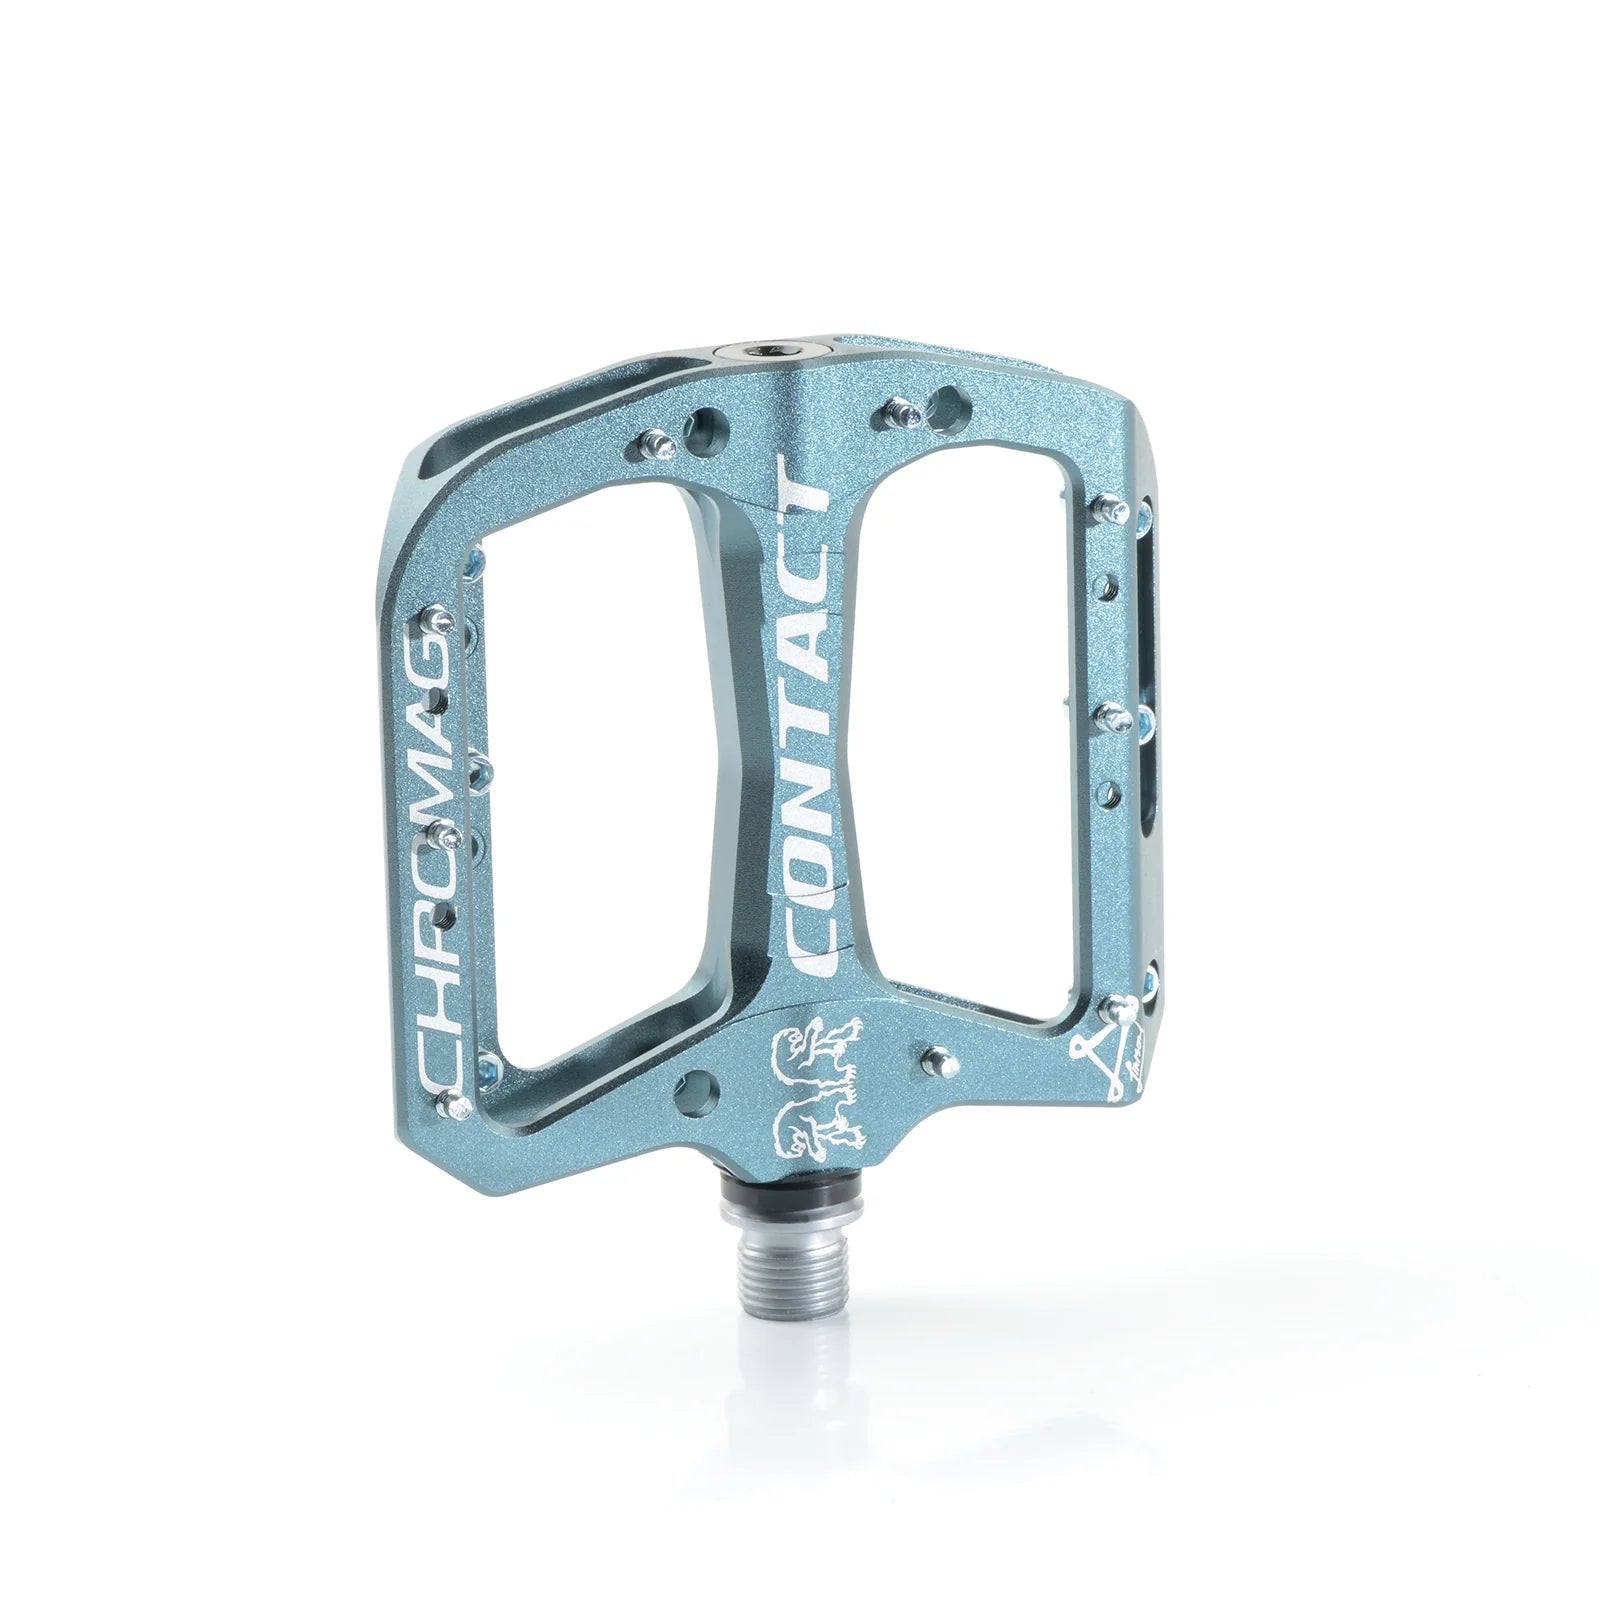 Chromag Contact Pedals